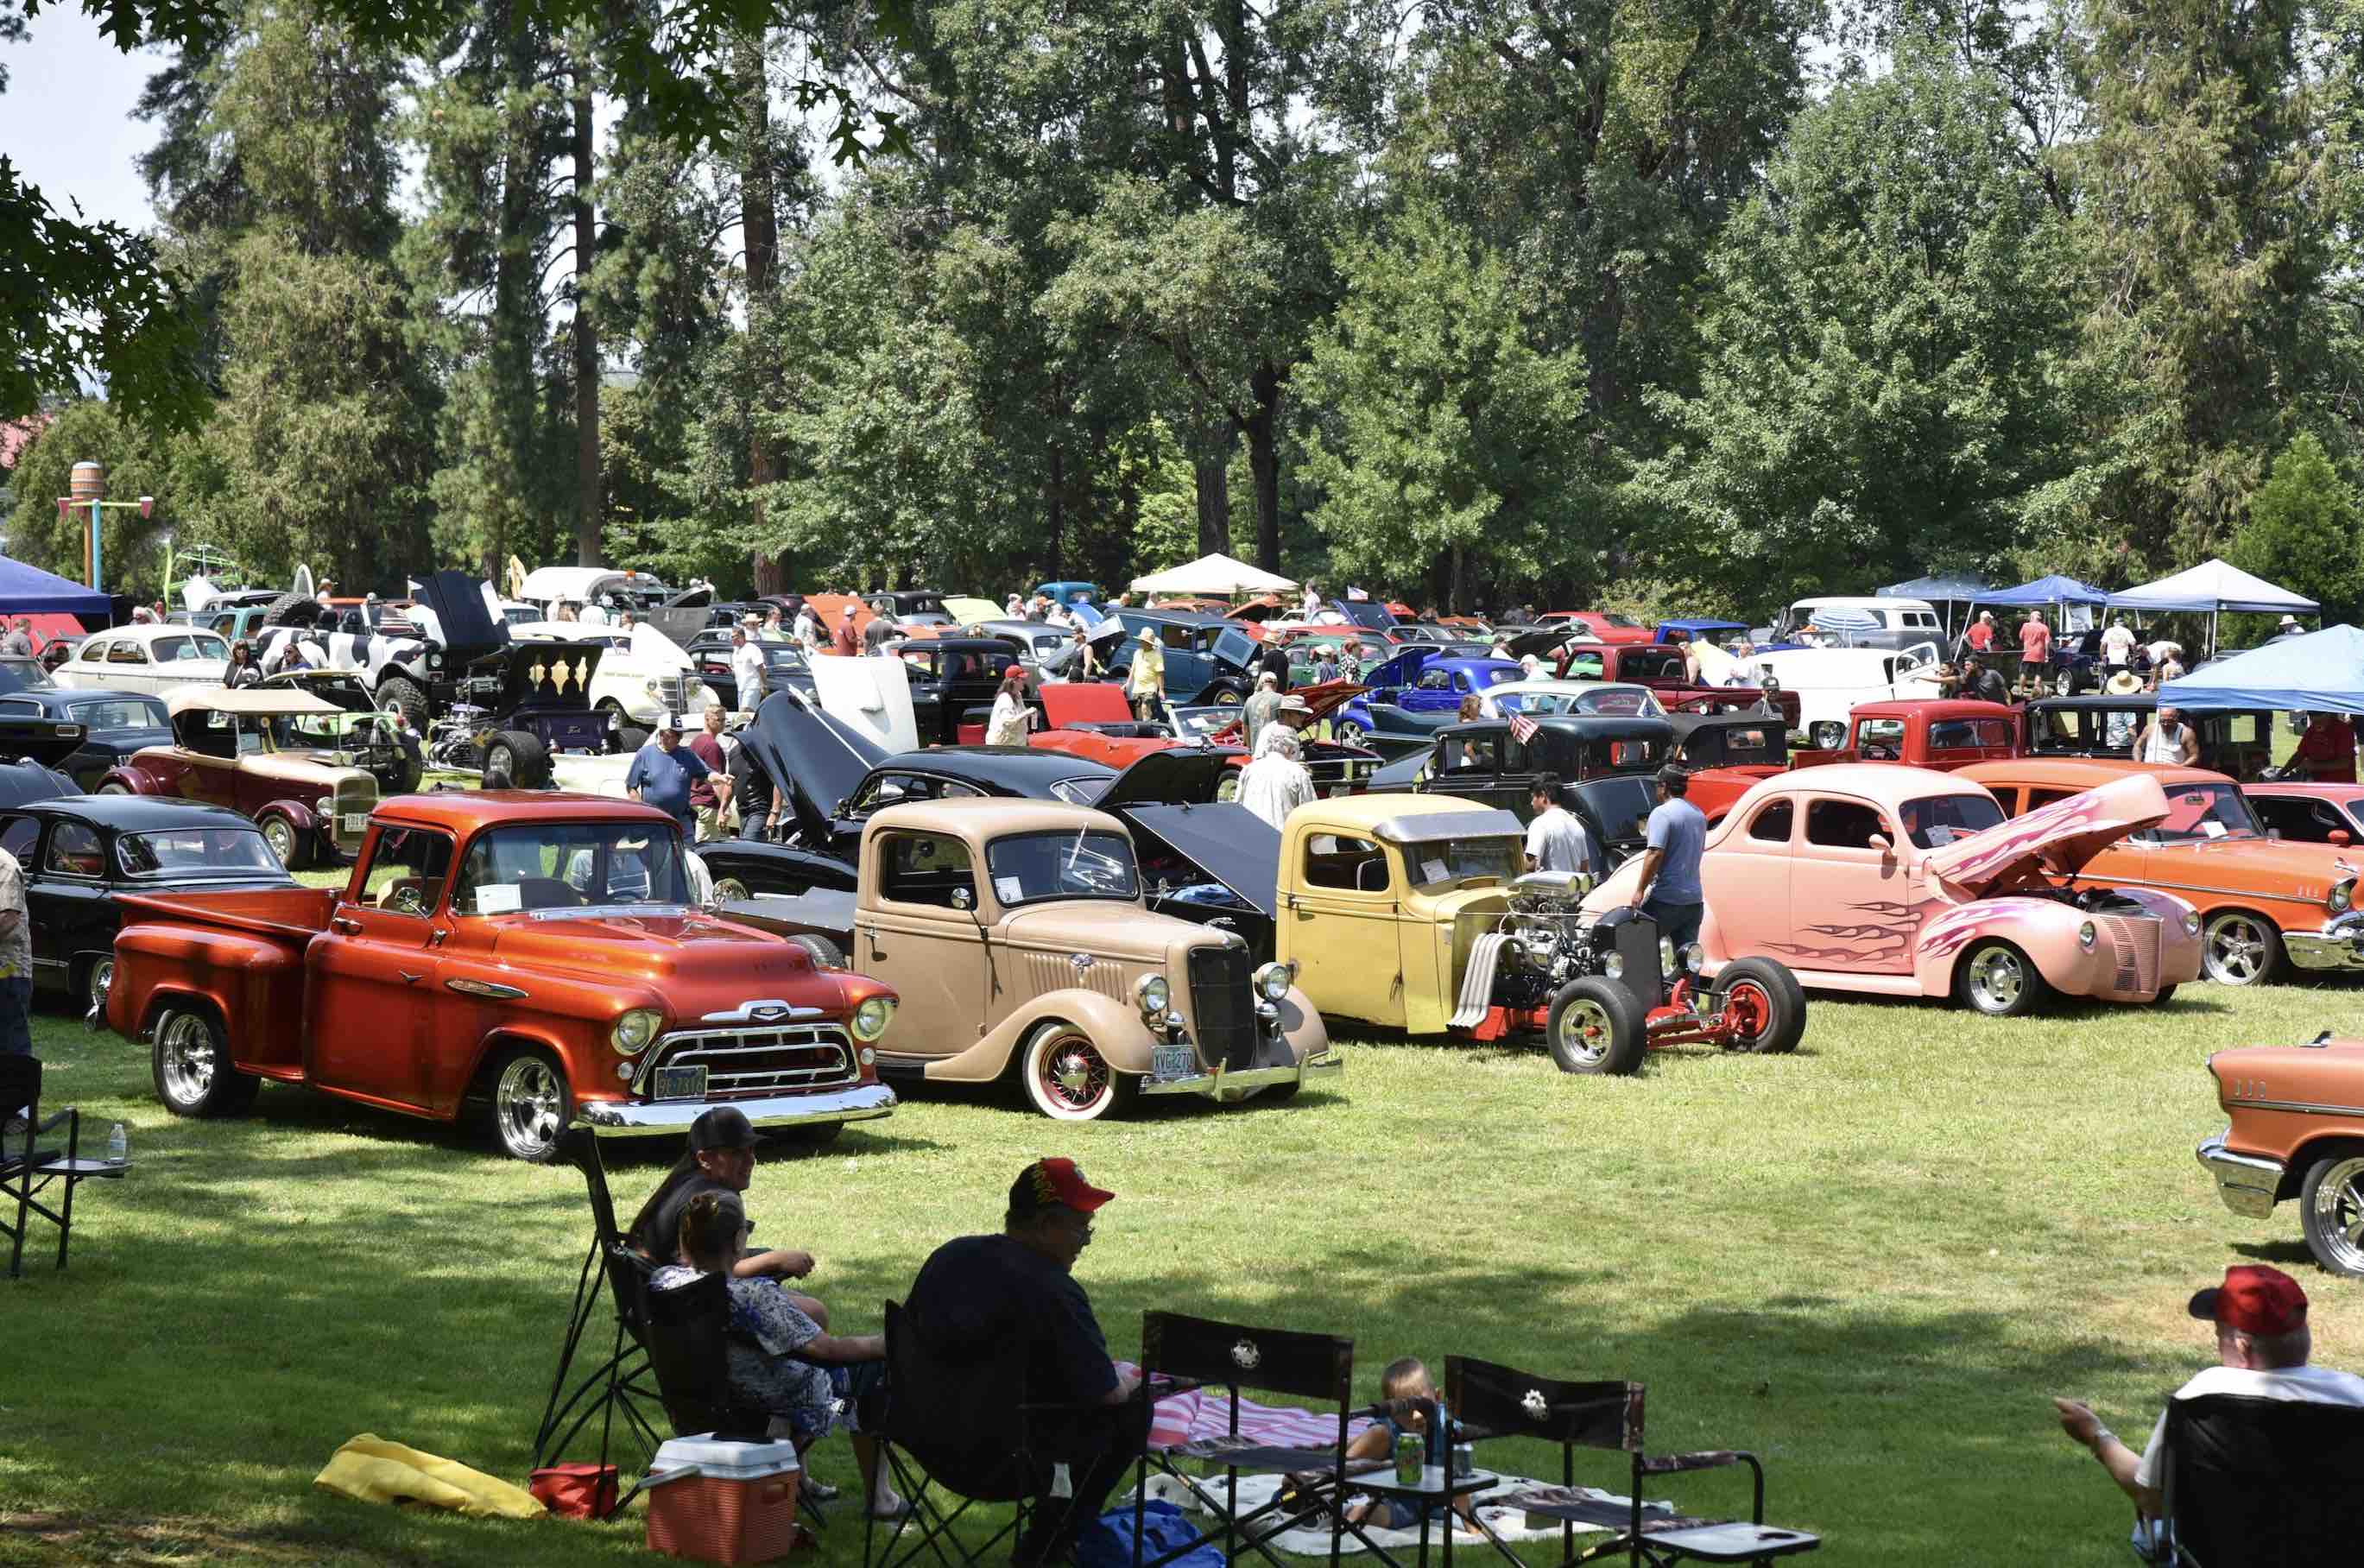 Vintage cars in Grants Pass